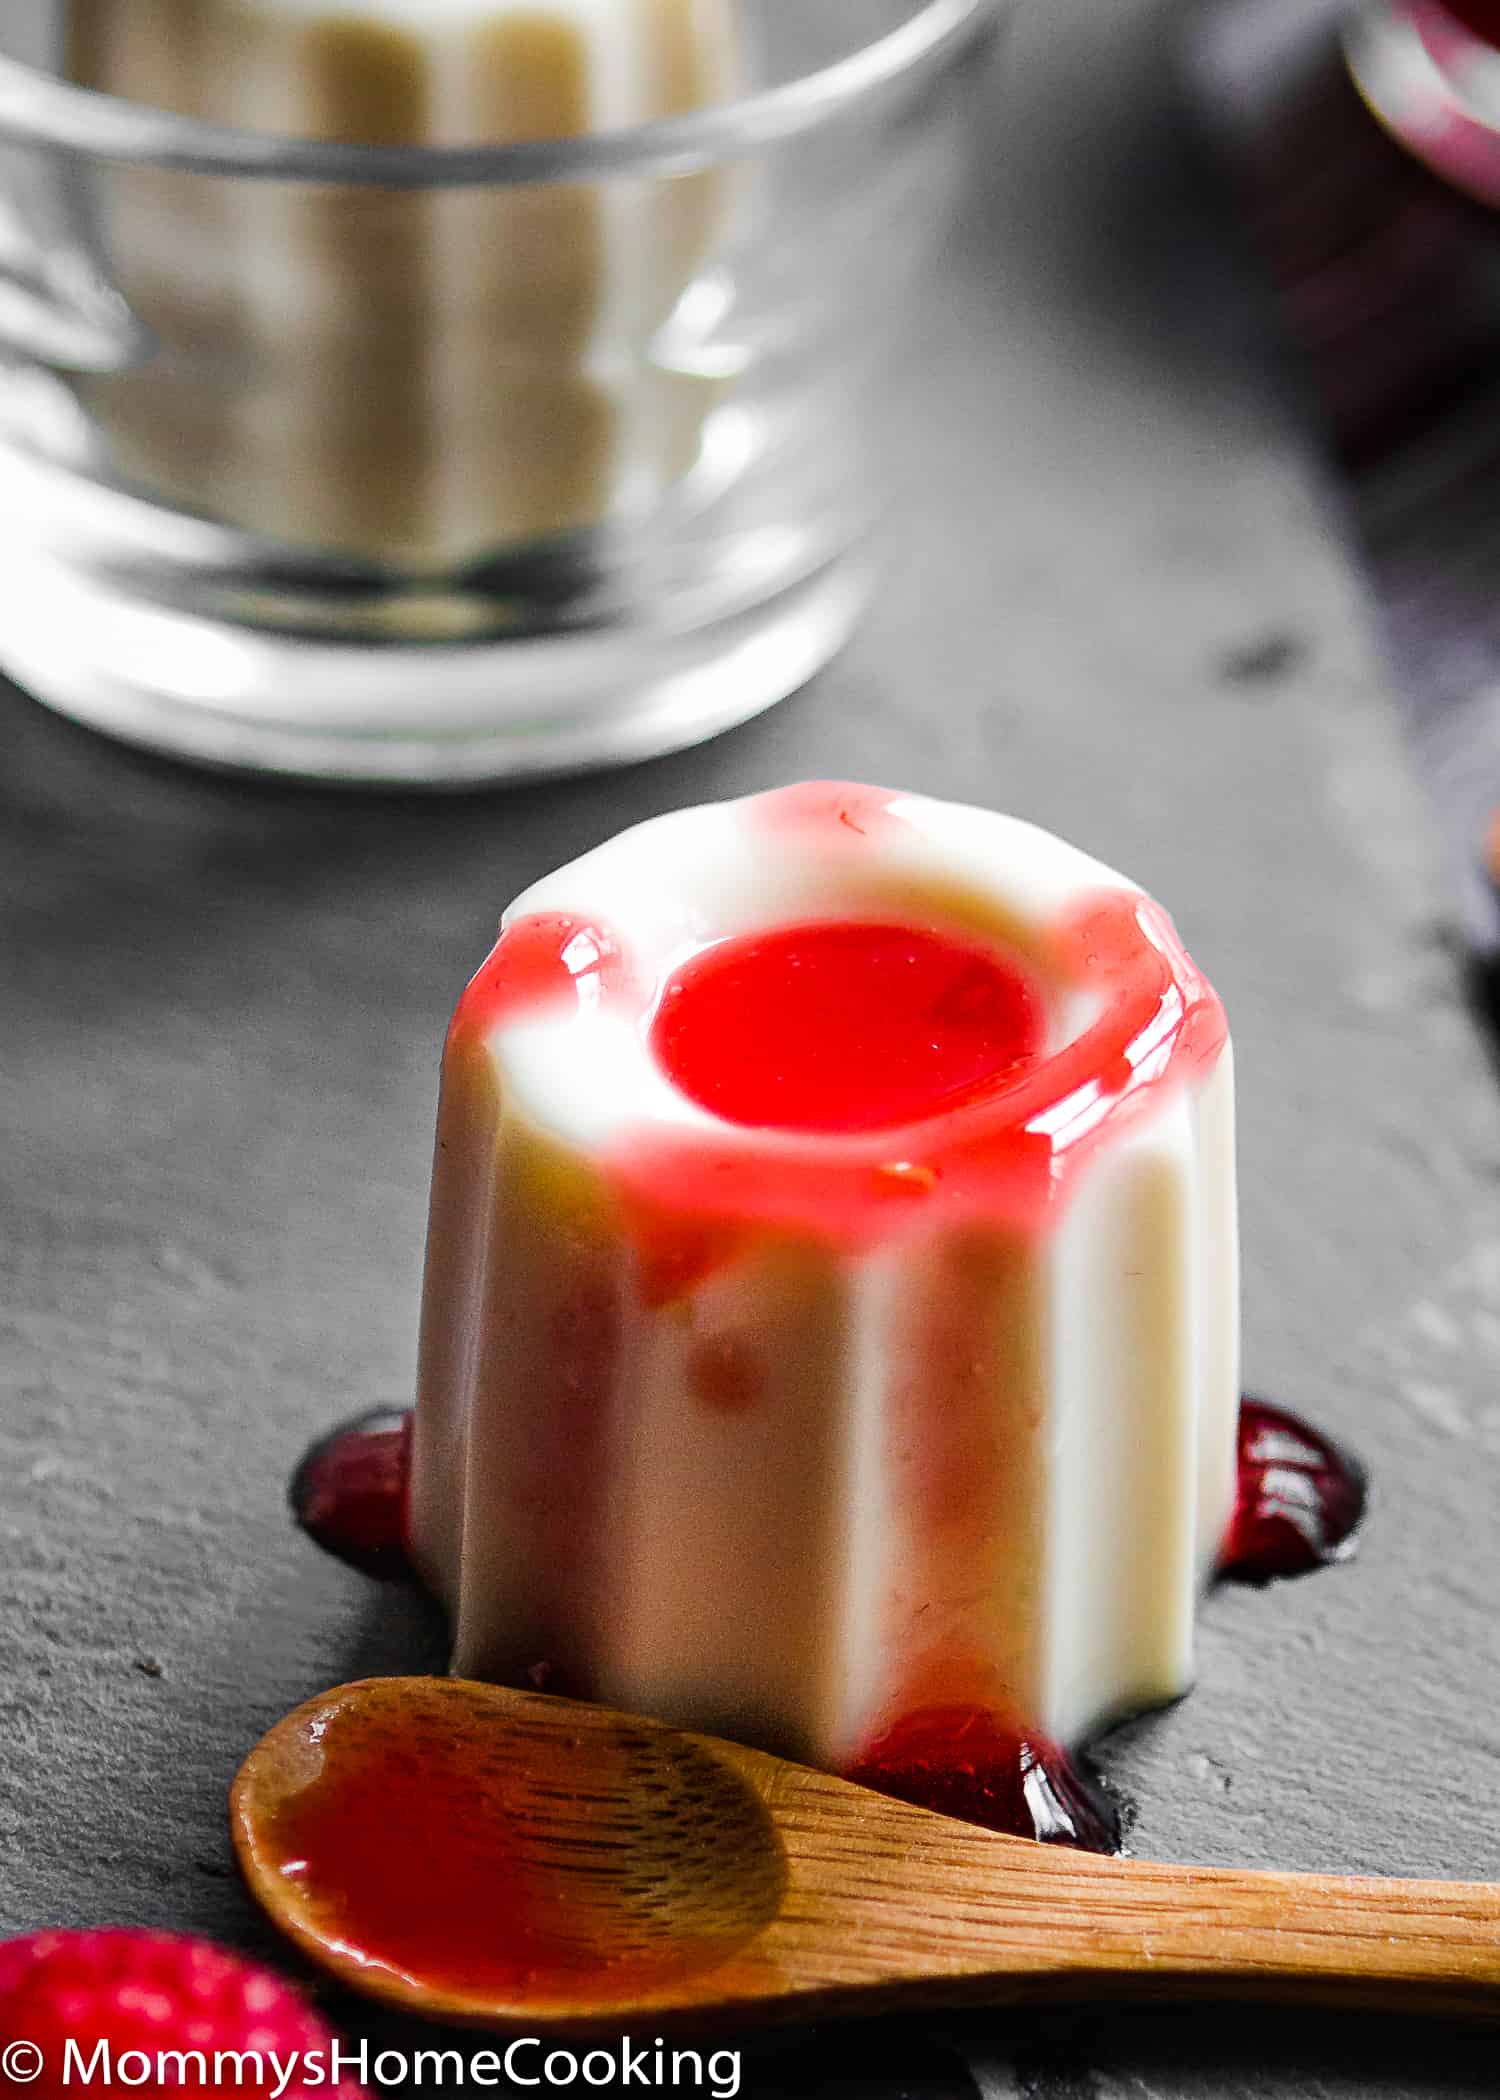 This Panna Cotta with Raspberry Coulis recipe is creamy, rich and silky! This amazingly creamy, melting in the mouth dessert is super easy to make with just 5 ingredients. https://mommyshomecooking.com